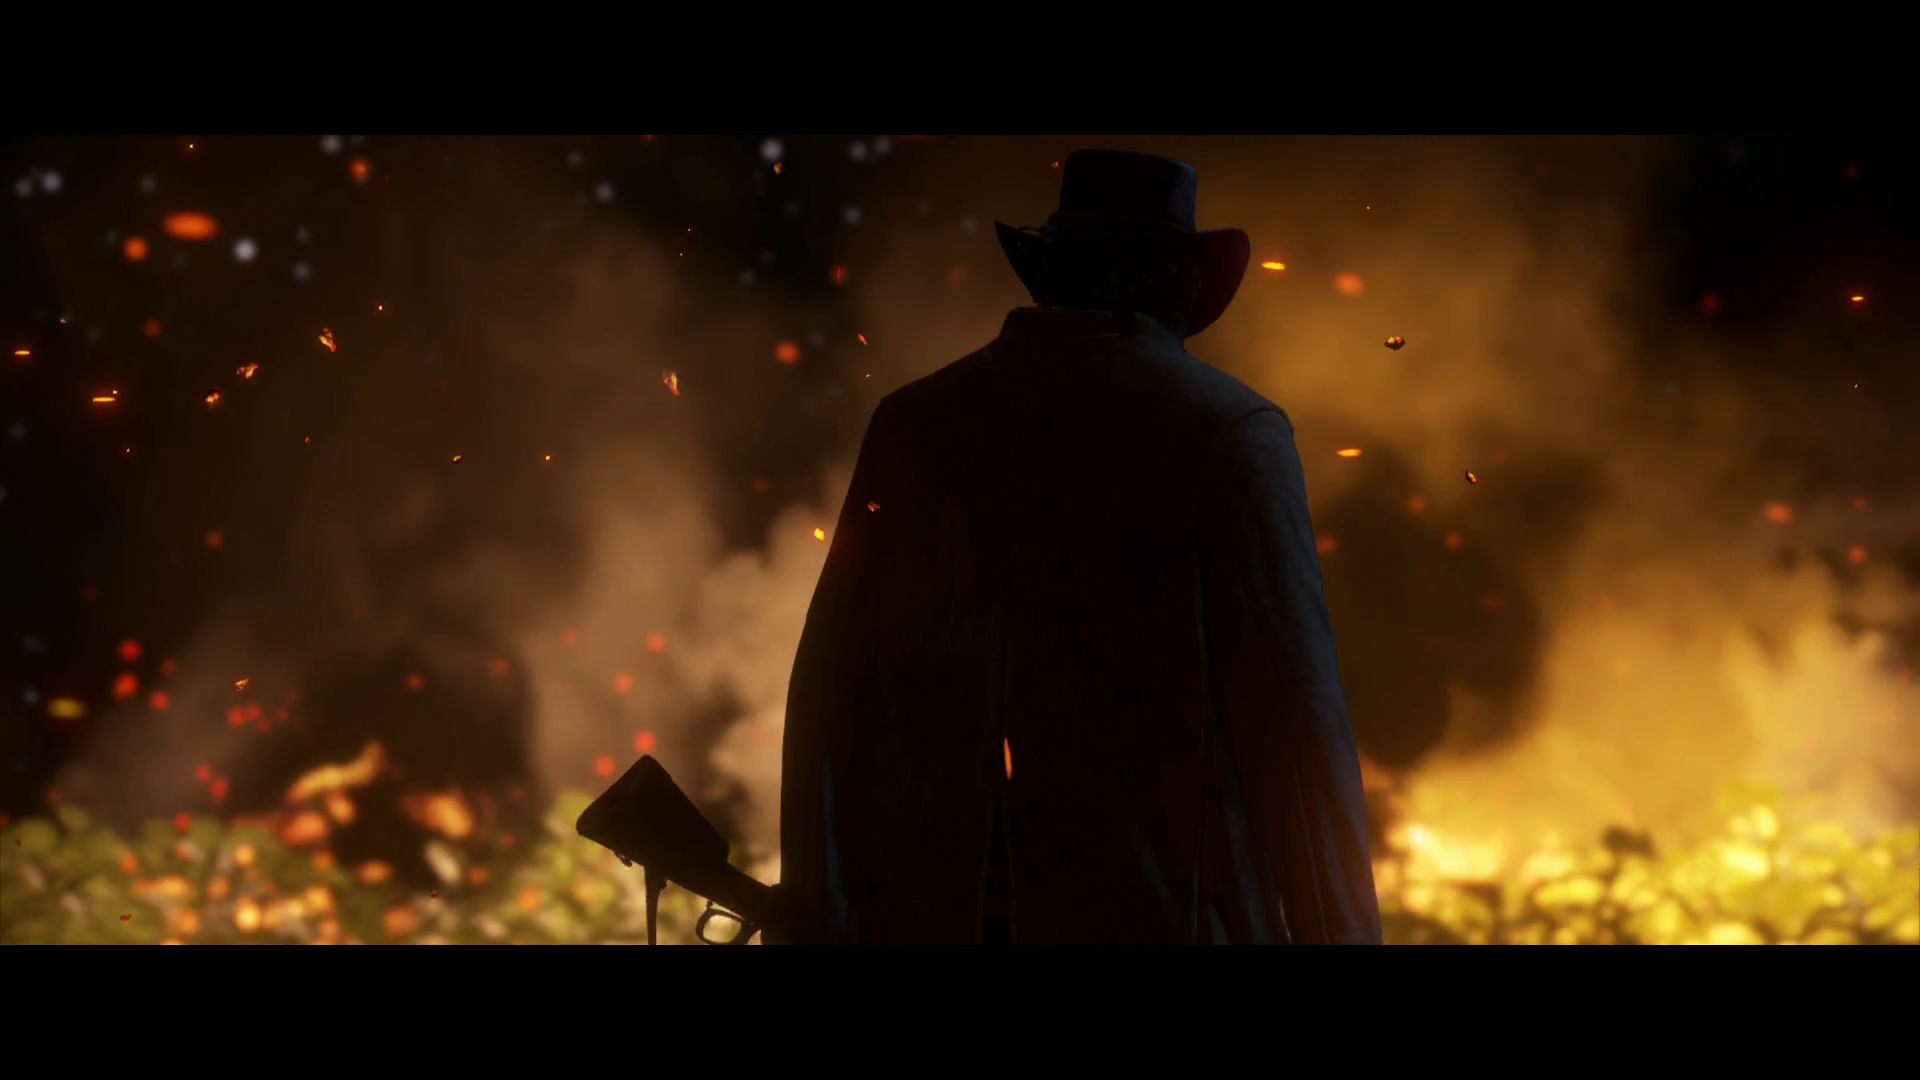 http://www.rdrvision.com/images/content/red-dead-redemption-2/trailer_1/red-dead-redemption-2_trailer-1_20.png